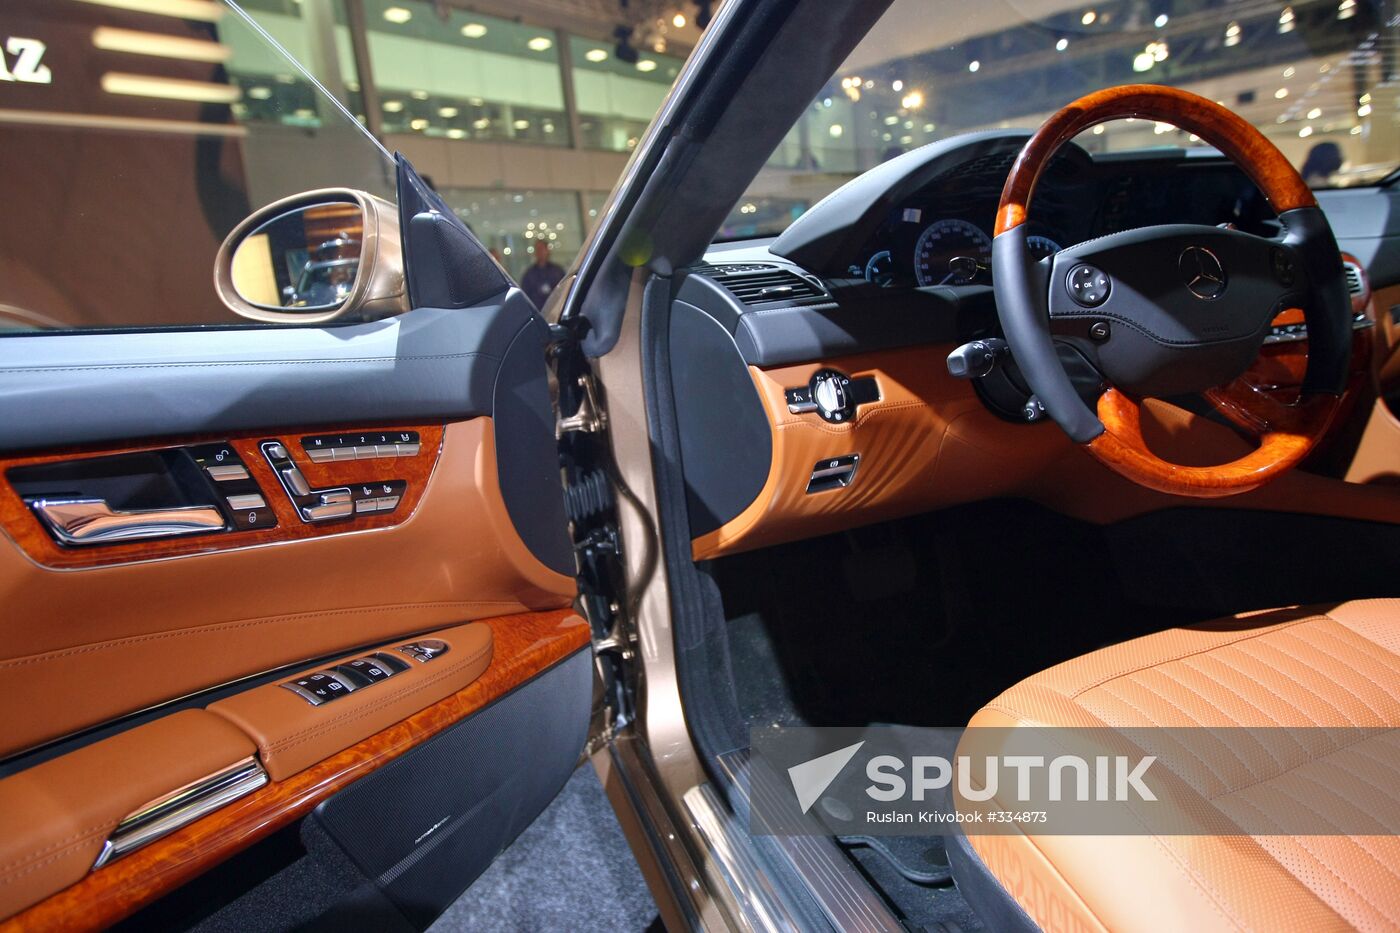 The Moscow International Auto Show